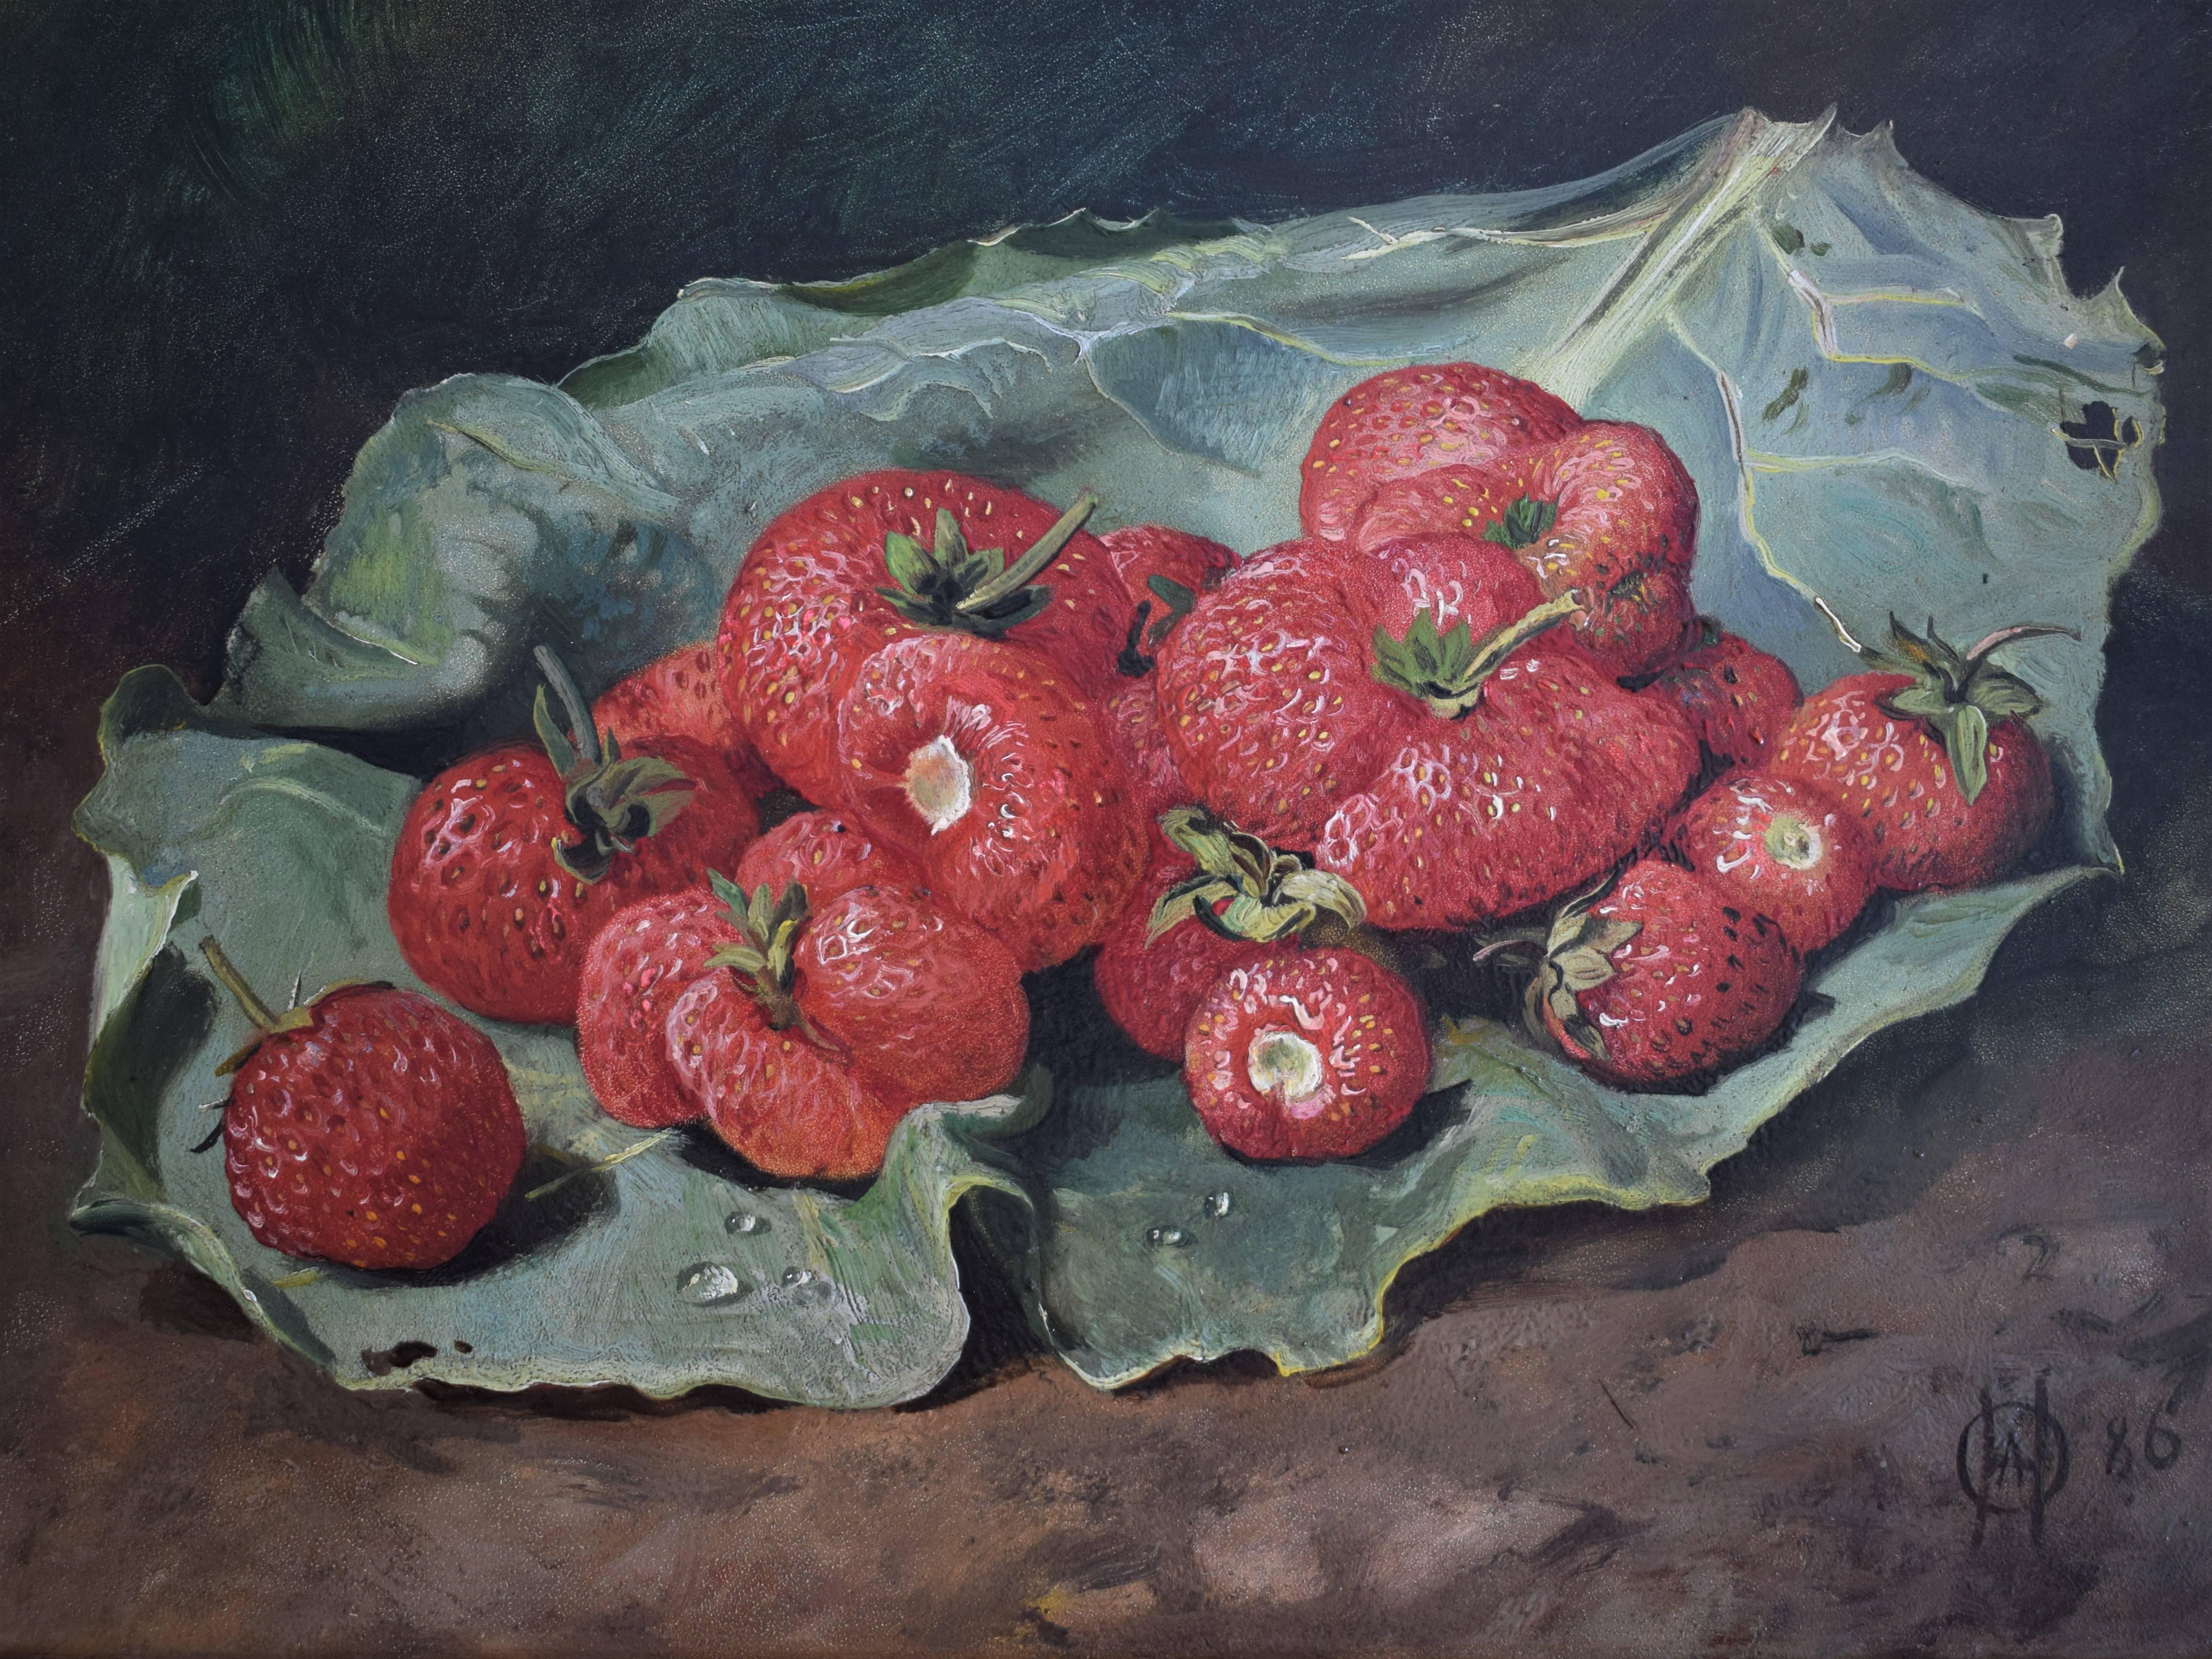 Oil painting with strawberries on a rhubarb leaf by the Danish painter Oluf August Hermansen, b. Frederiksberg 1849, d. same place 1897.
Signed with monogram 